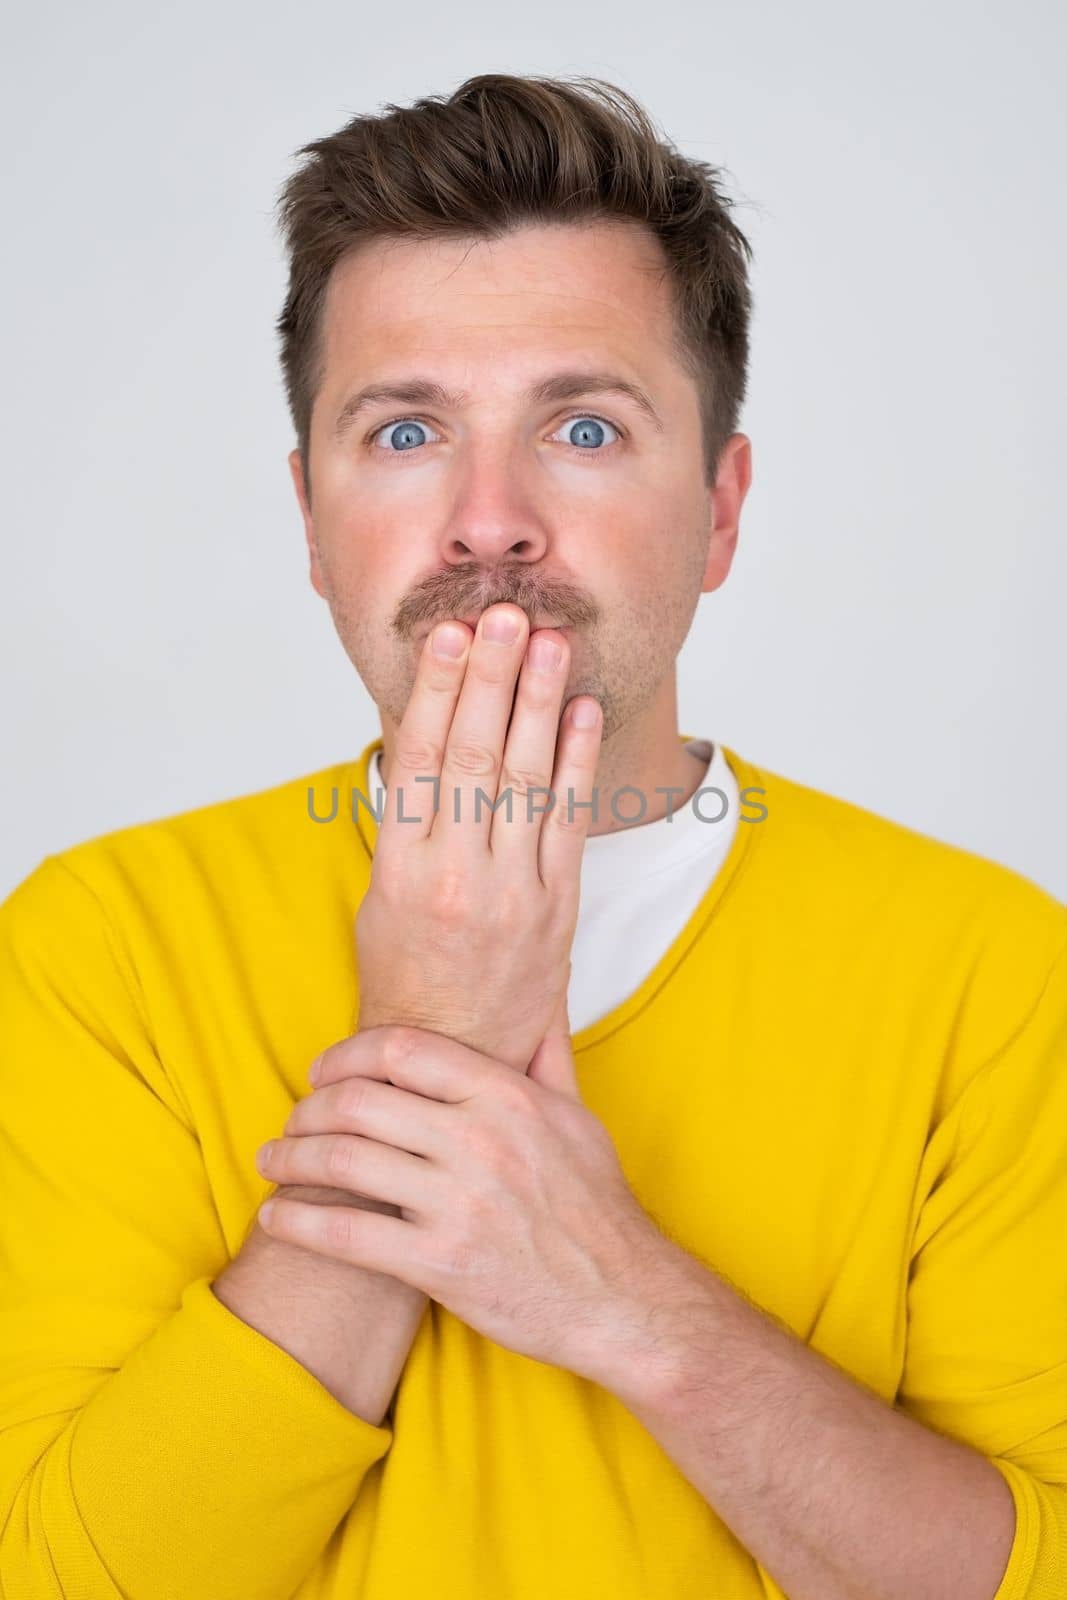 Surprised and Shocked caucasian man covering mouth with hands. Vertical orientation